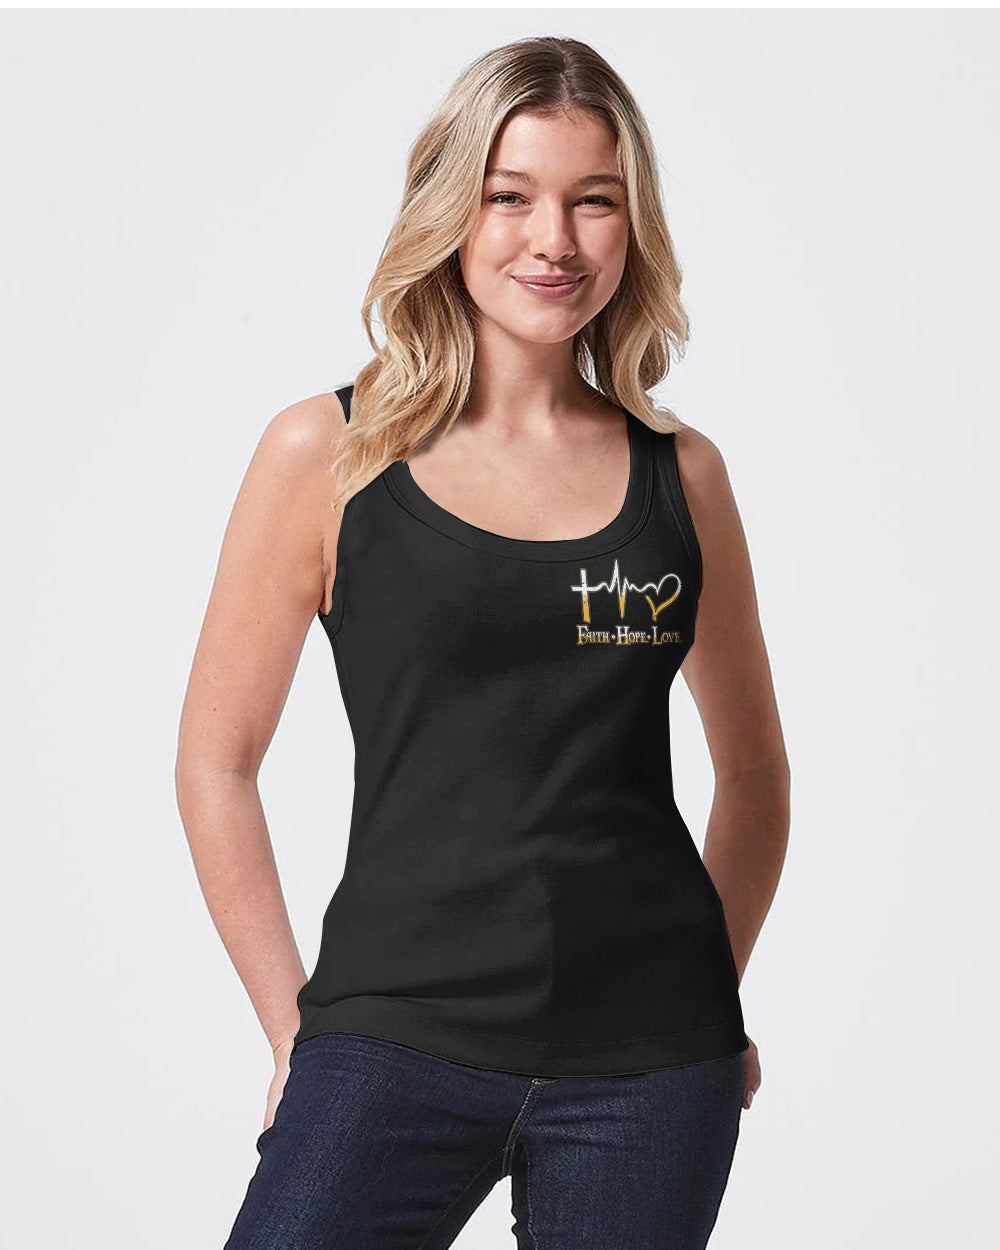 A Lot Can Happen In 3 Days Women's Christian Tanks